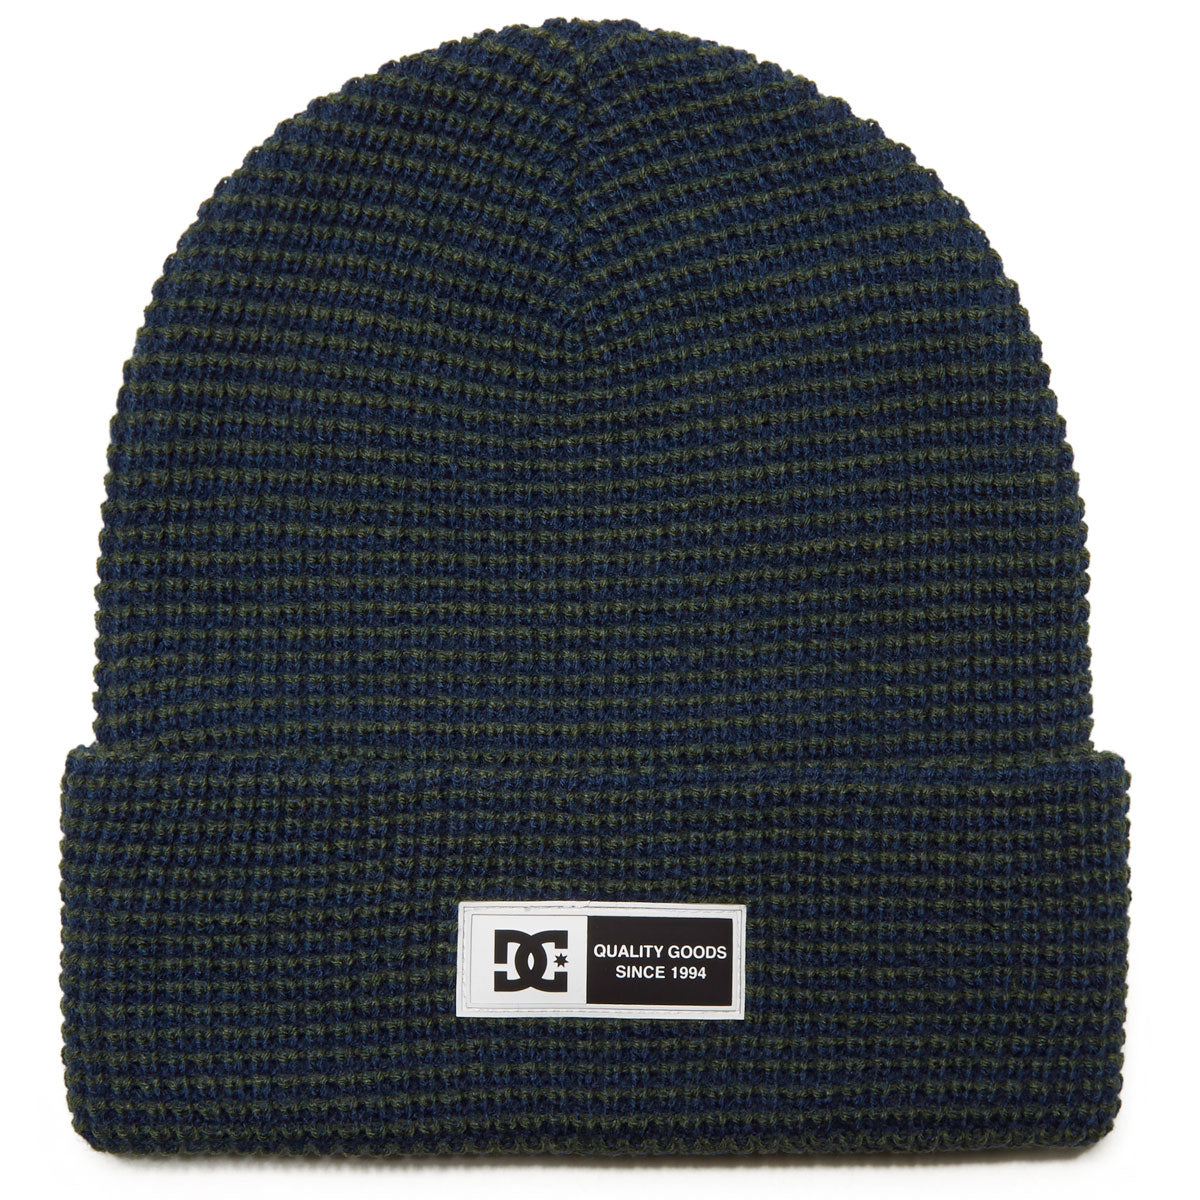 DC Sight 2024 Beanie - Sycamore image 1